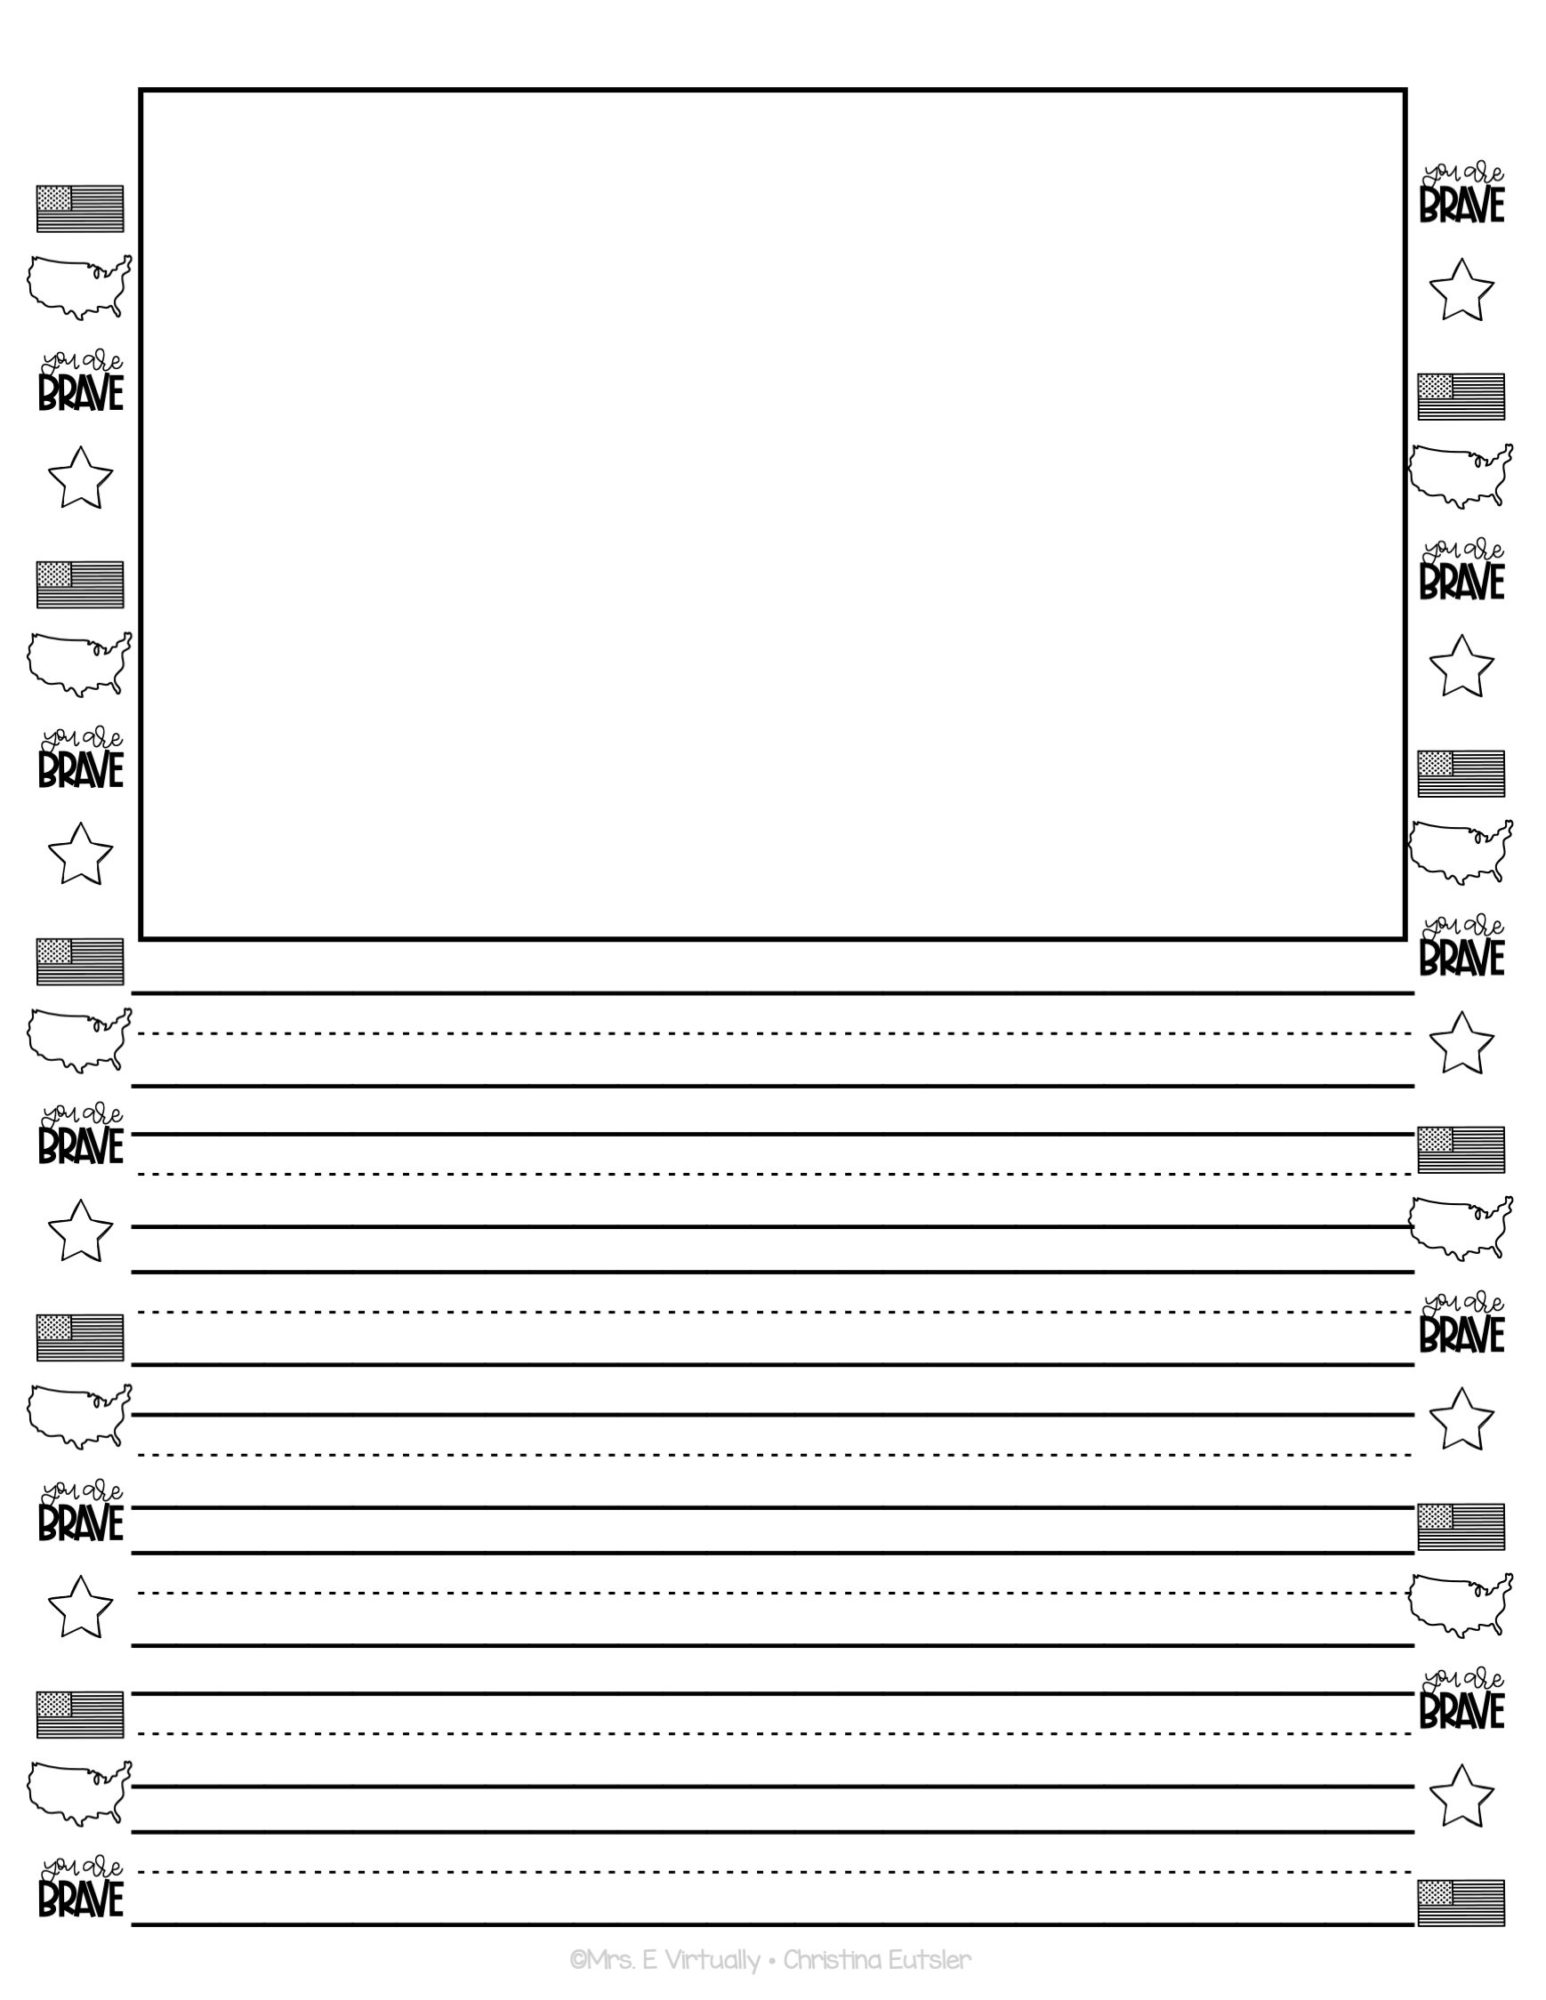 Free Printable First Grade Writing Paper With Picture Box